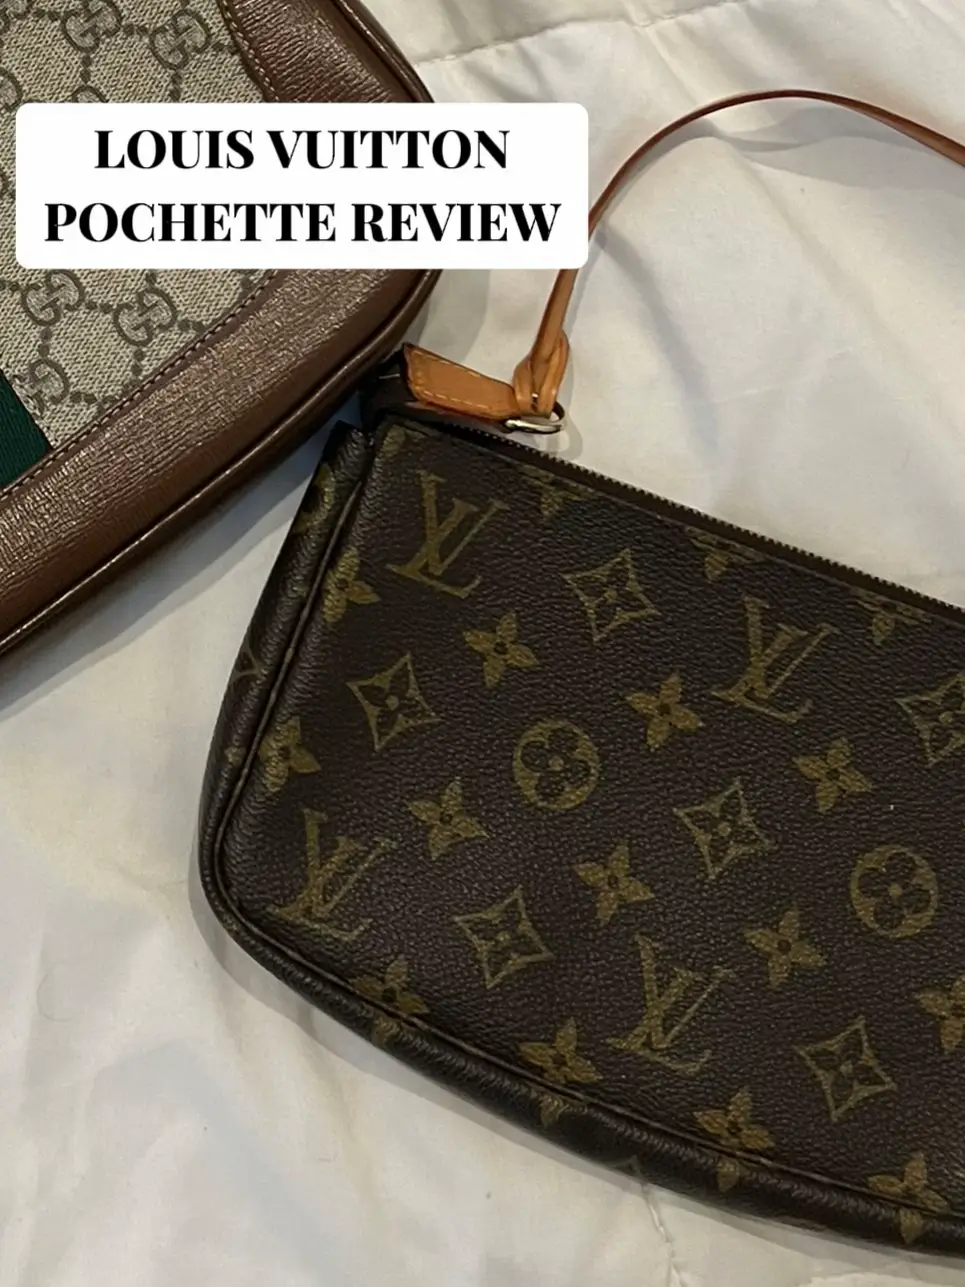 LOUIS VUITTON POCHETTE REVIEW  Gallery posted by Sstephkoutss